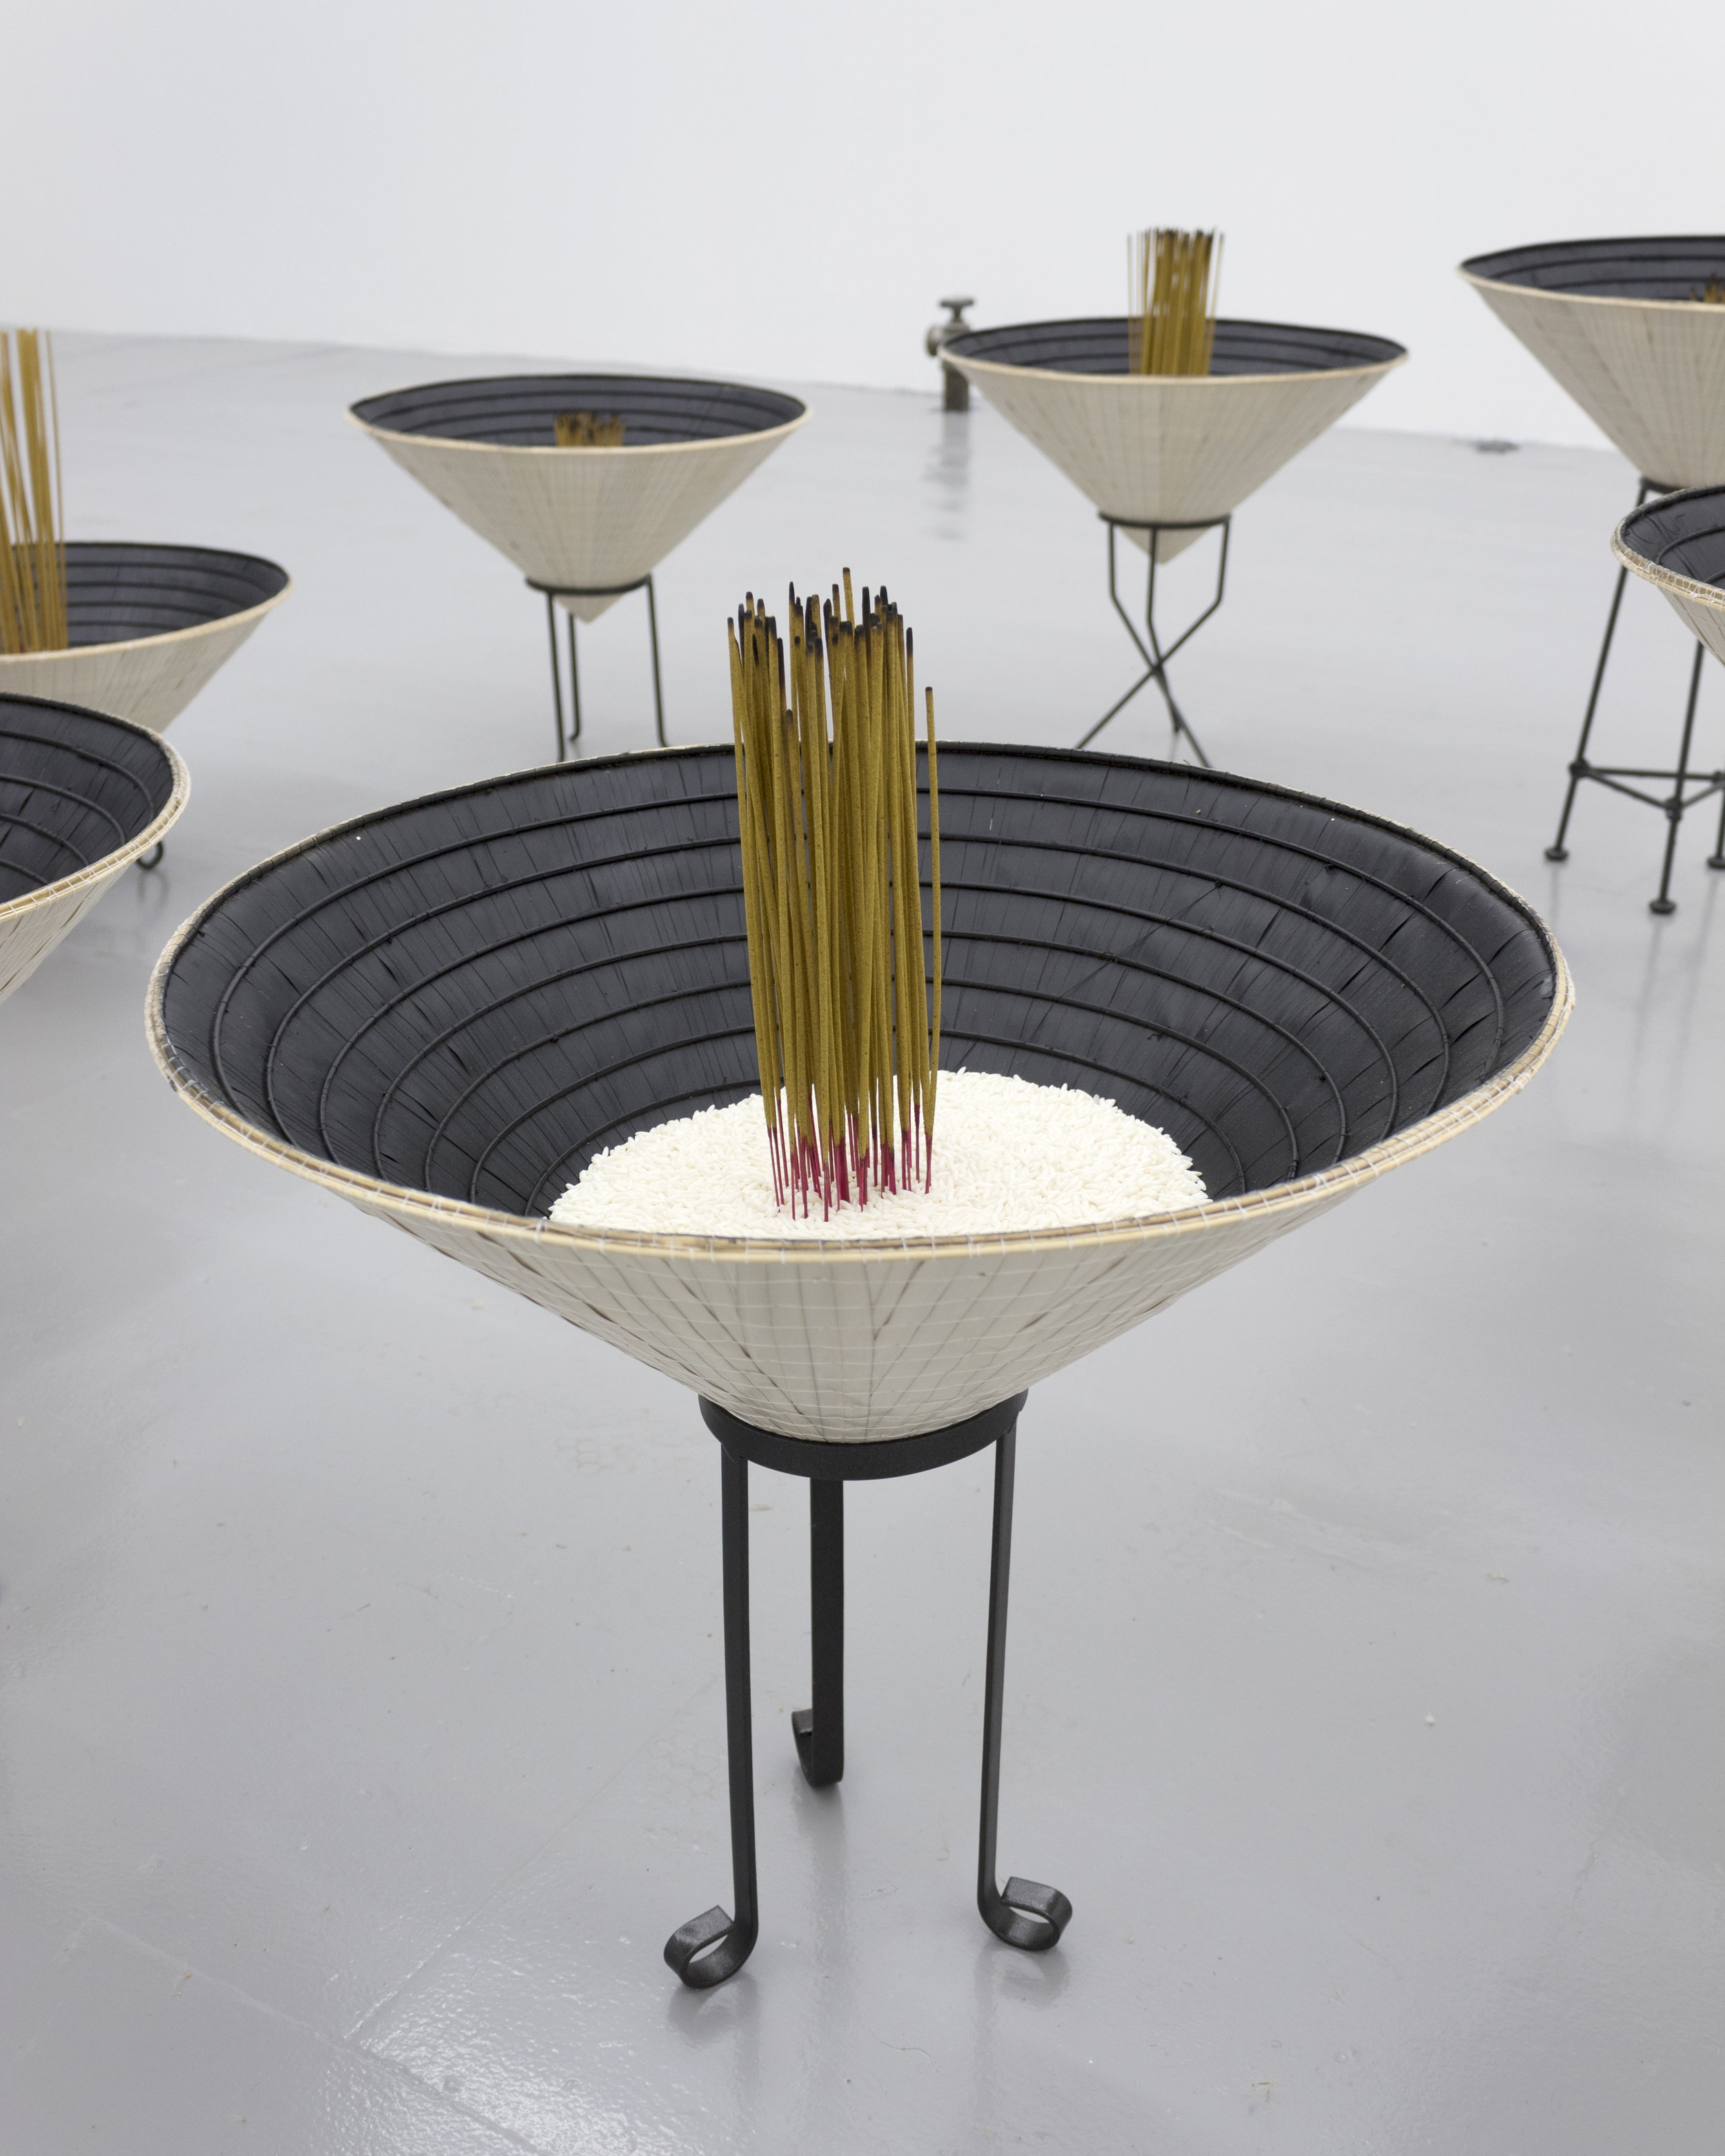  Millian Giang Lien Pham,  Reforge: 9 Phases (Four),  2019. Conical hat, sweet rice, incense, metal stand 